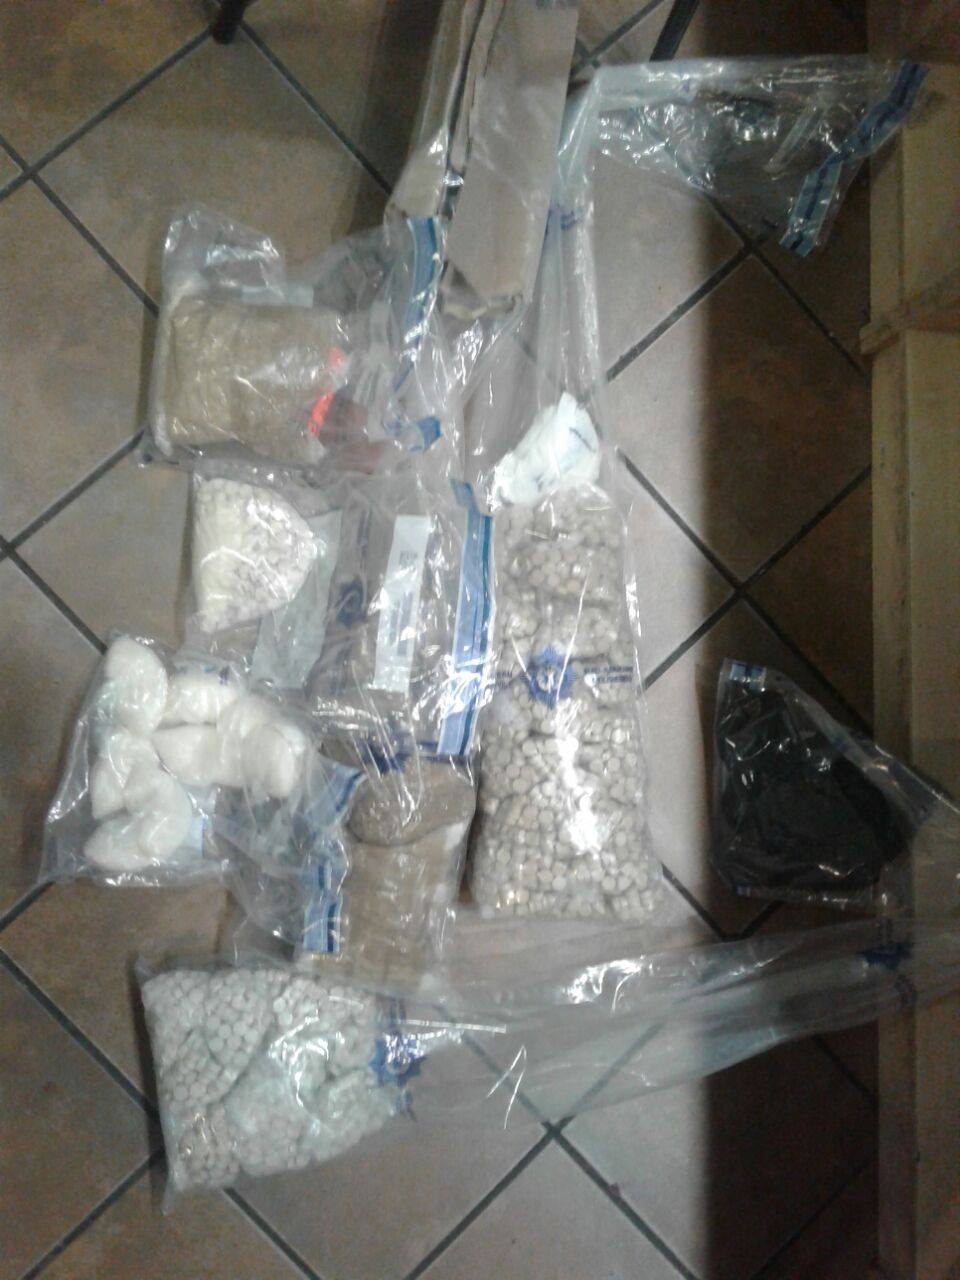 Drugs valued at R291 000 seized and a perpetrator brought to book in Bothasig